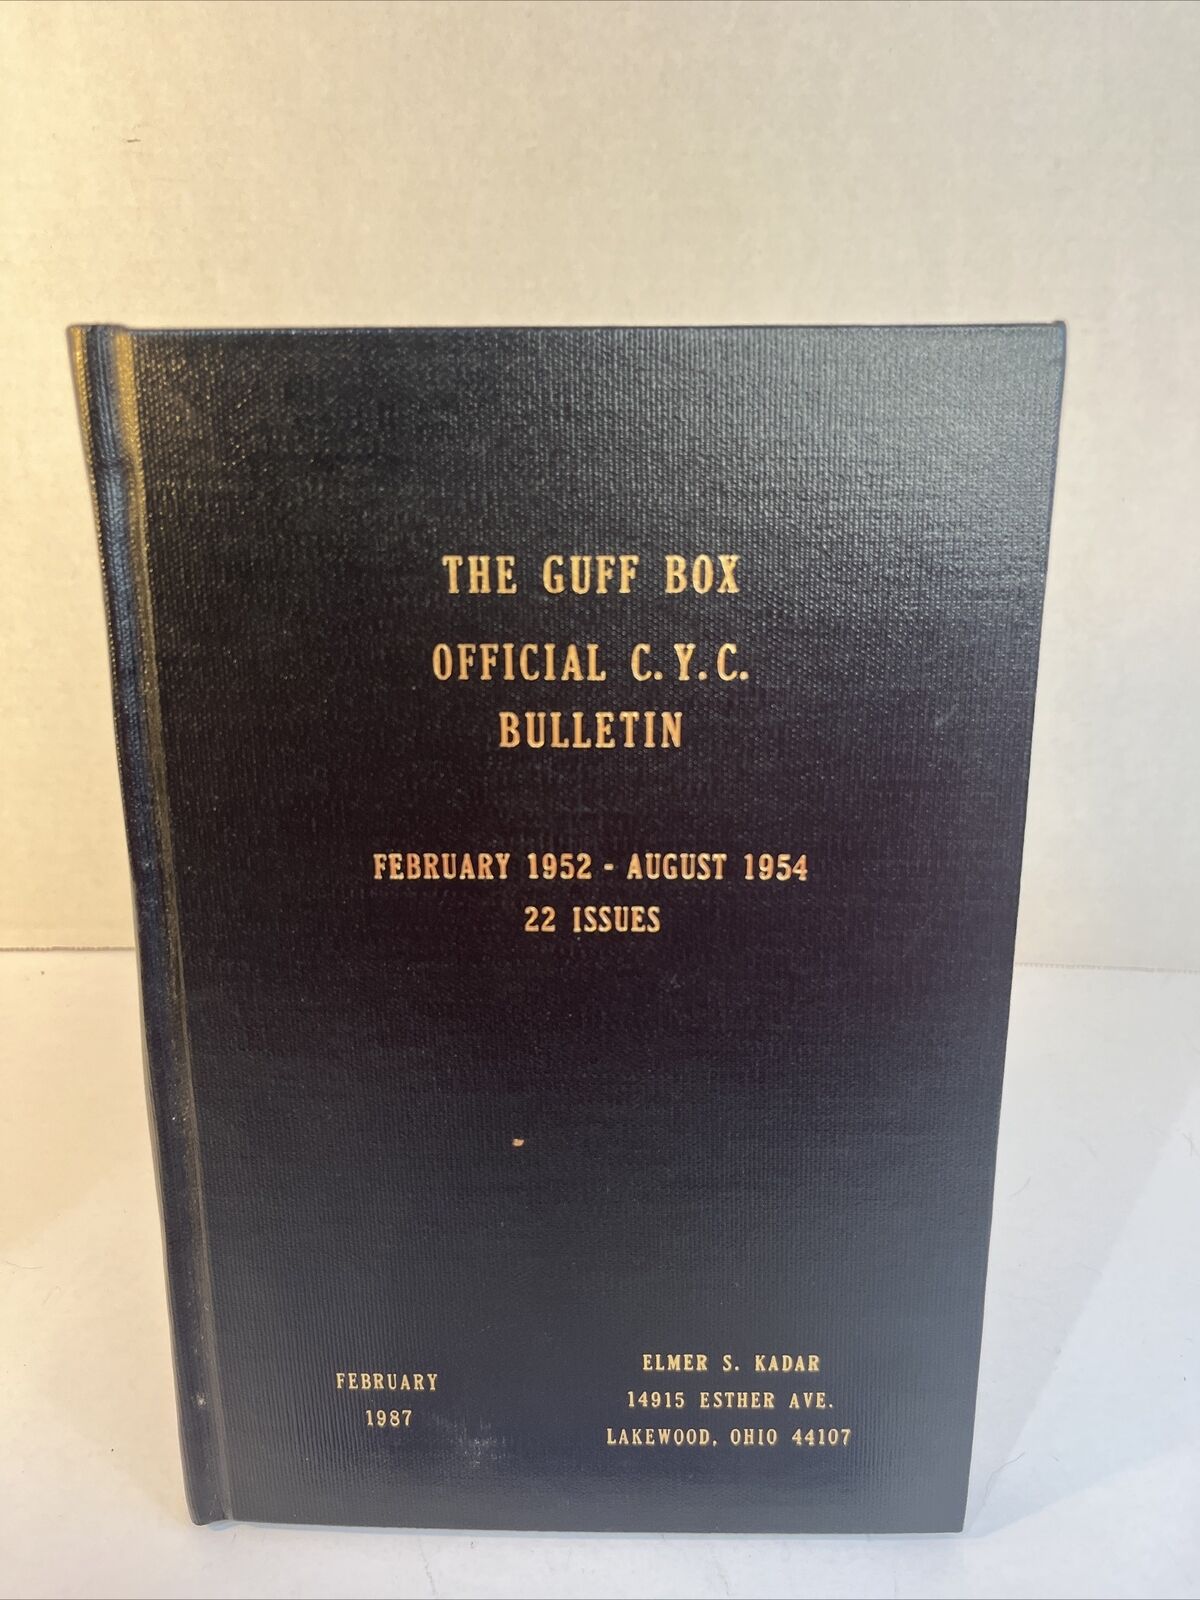 February 1952-August 1954 Bound Set Of The Cleveland Yacht Club “The Guff Box”